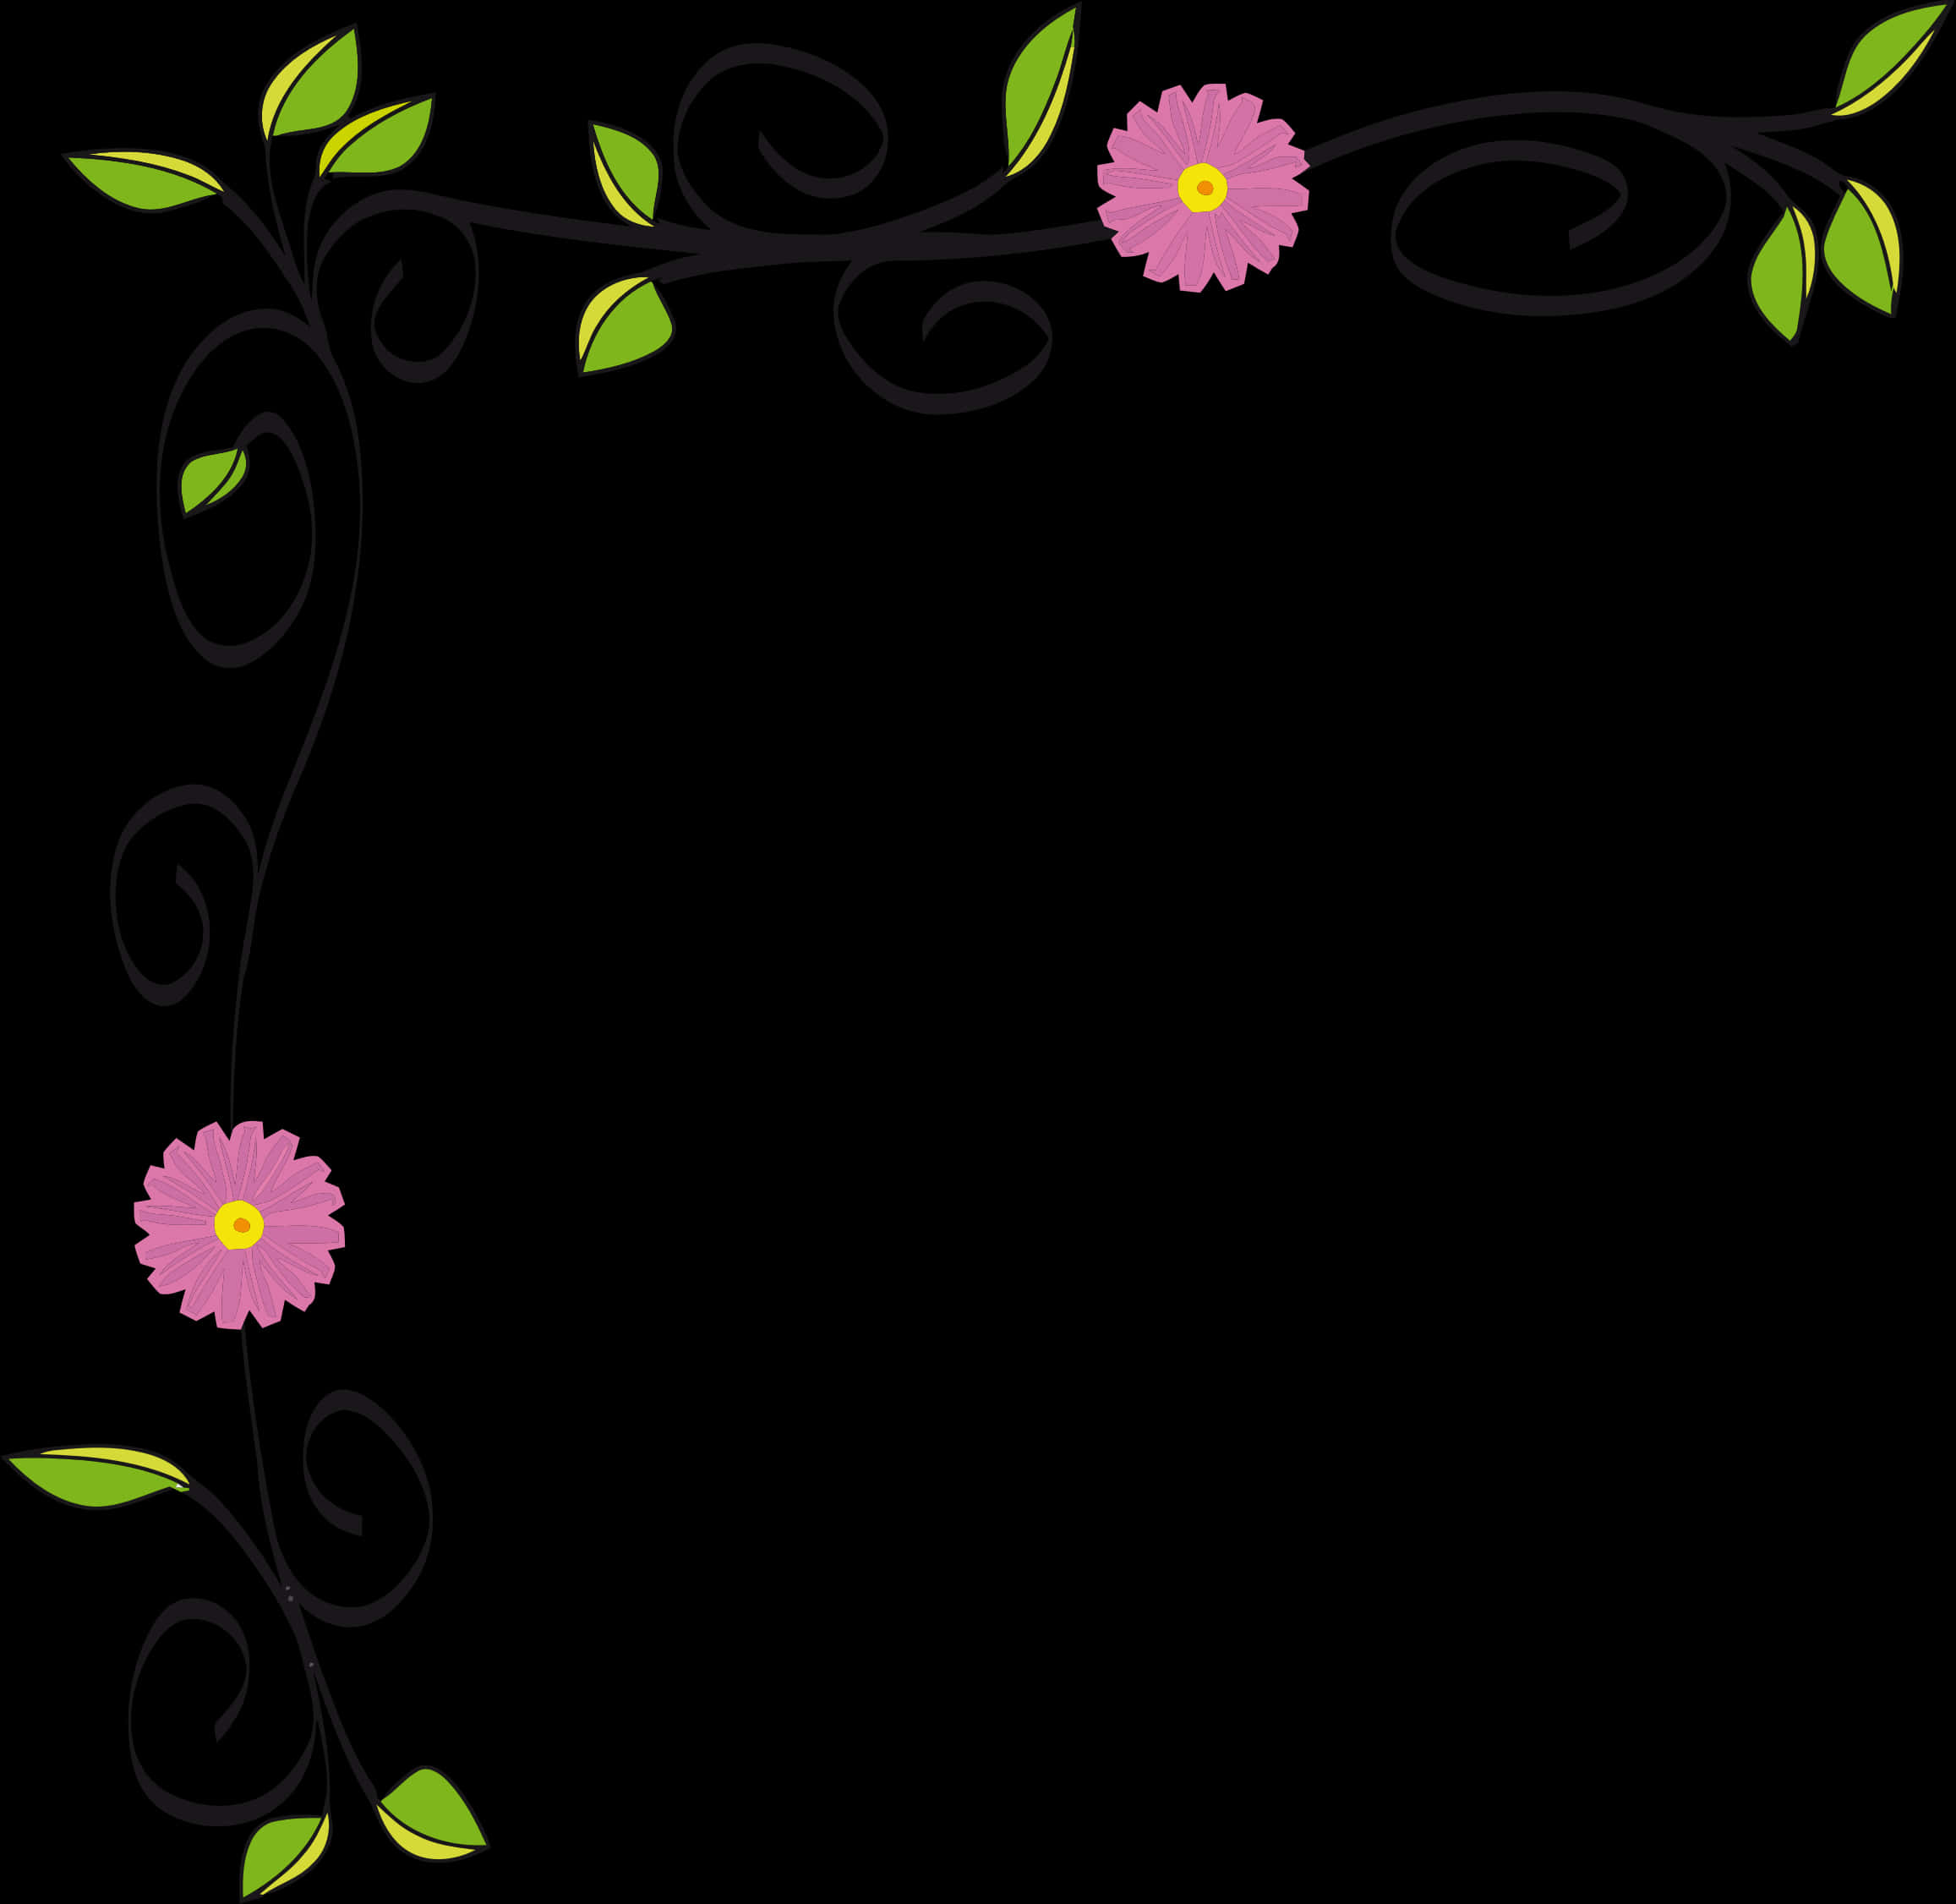 A Black Background With A Flower And Leaves